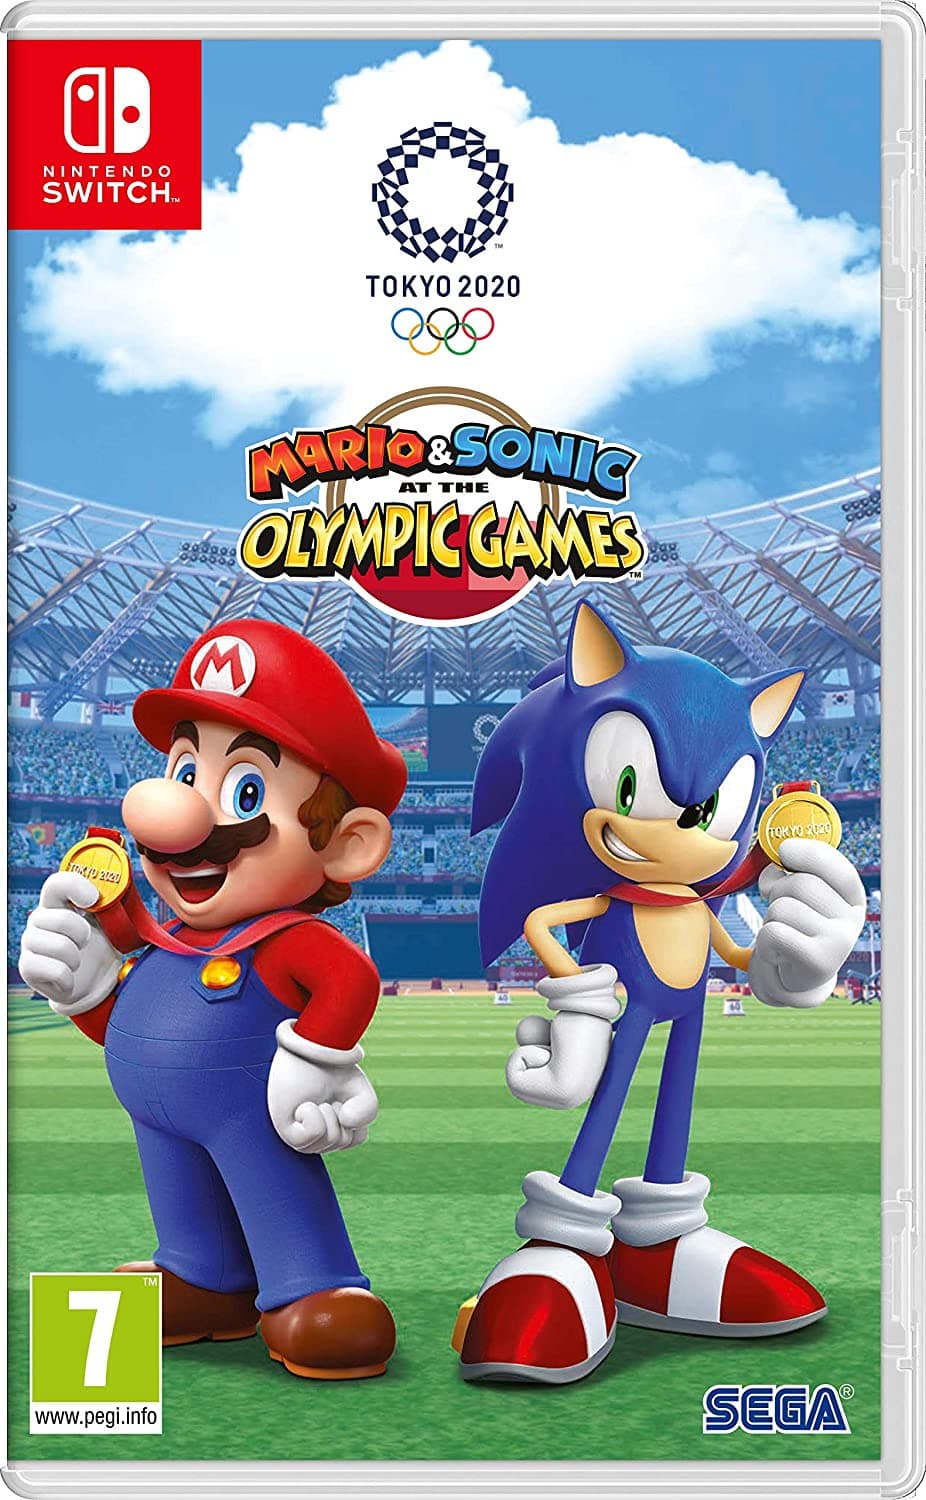 Mario & Sonic at the Olympic Games: Tokyo 2020 for Nintendo Switch artwork.